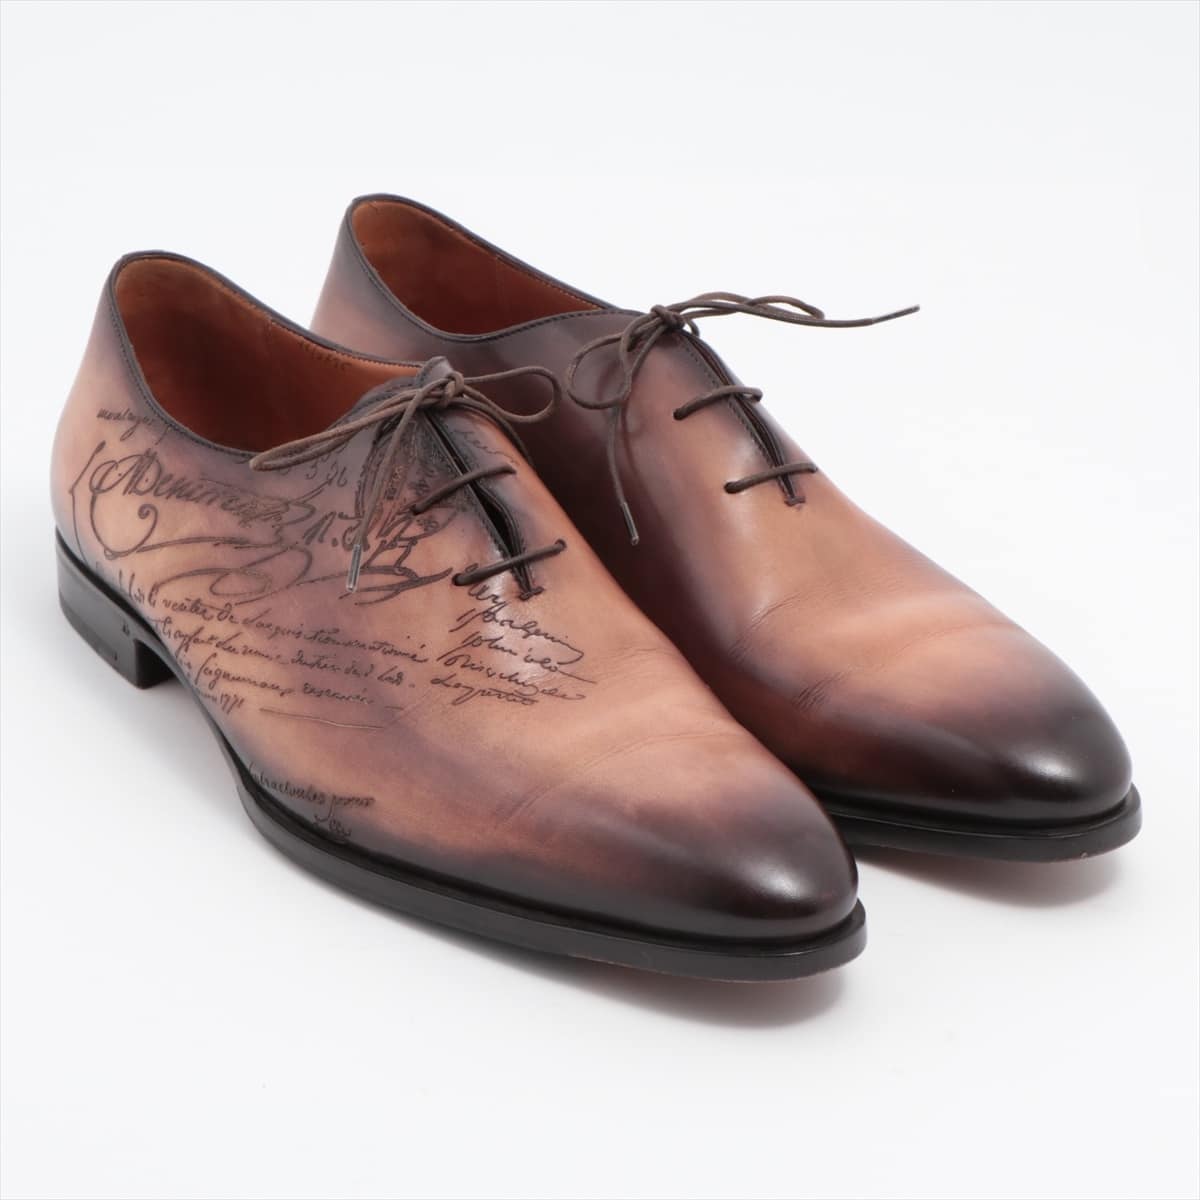 Berluti Alessandro Leather Dress shoes 11 Men's Brown Gare Calligraphy 3756 With genuine shoe tree